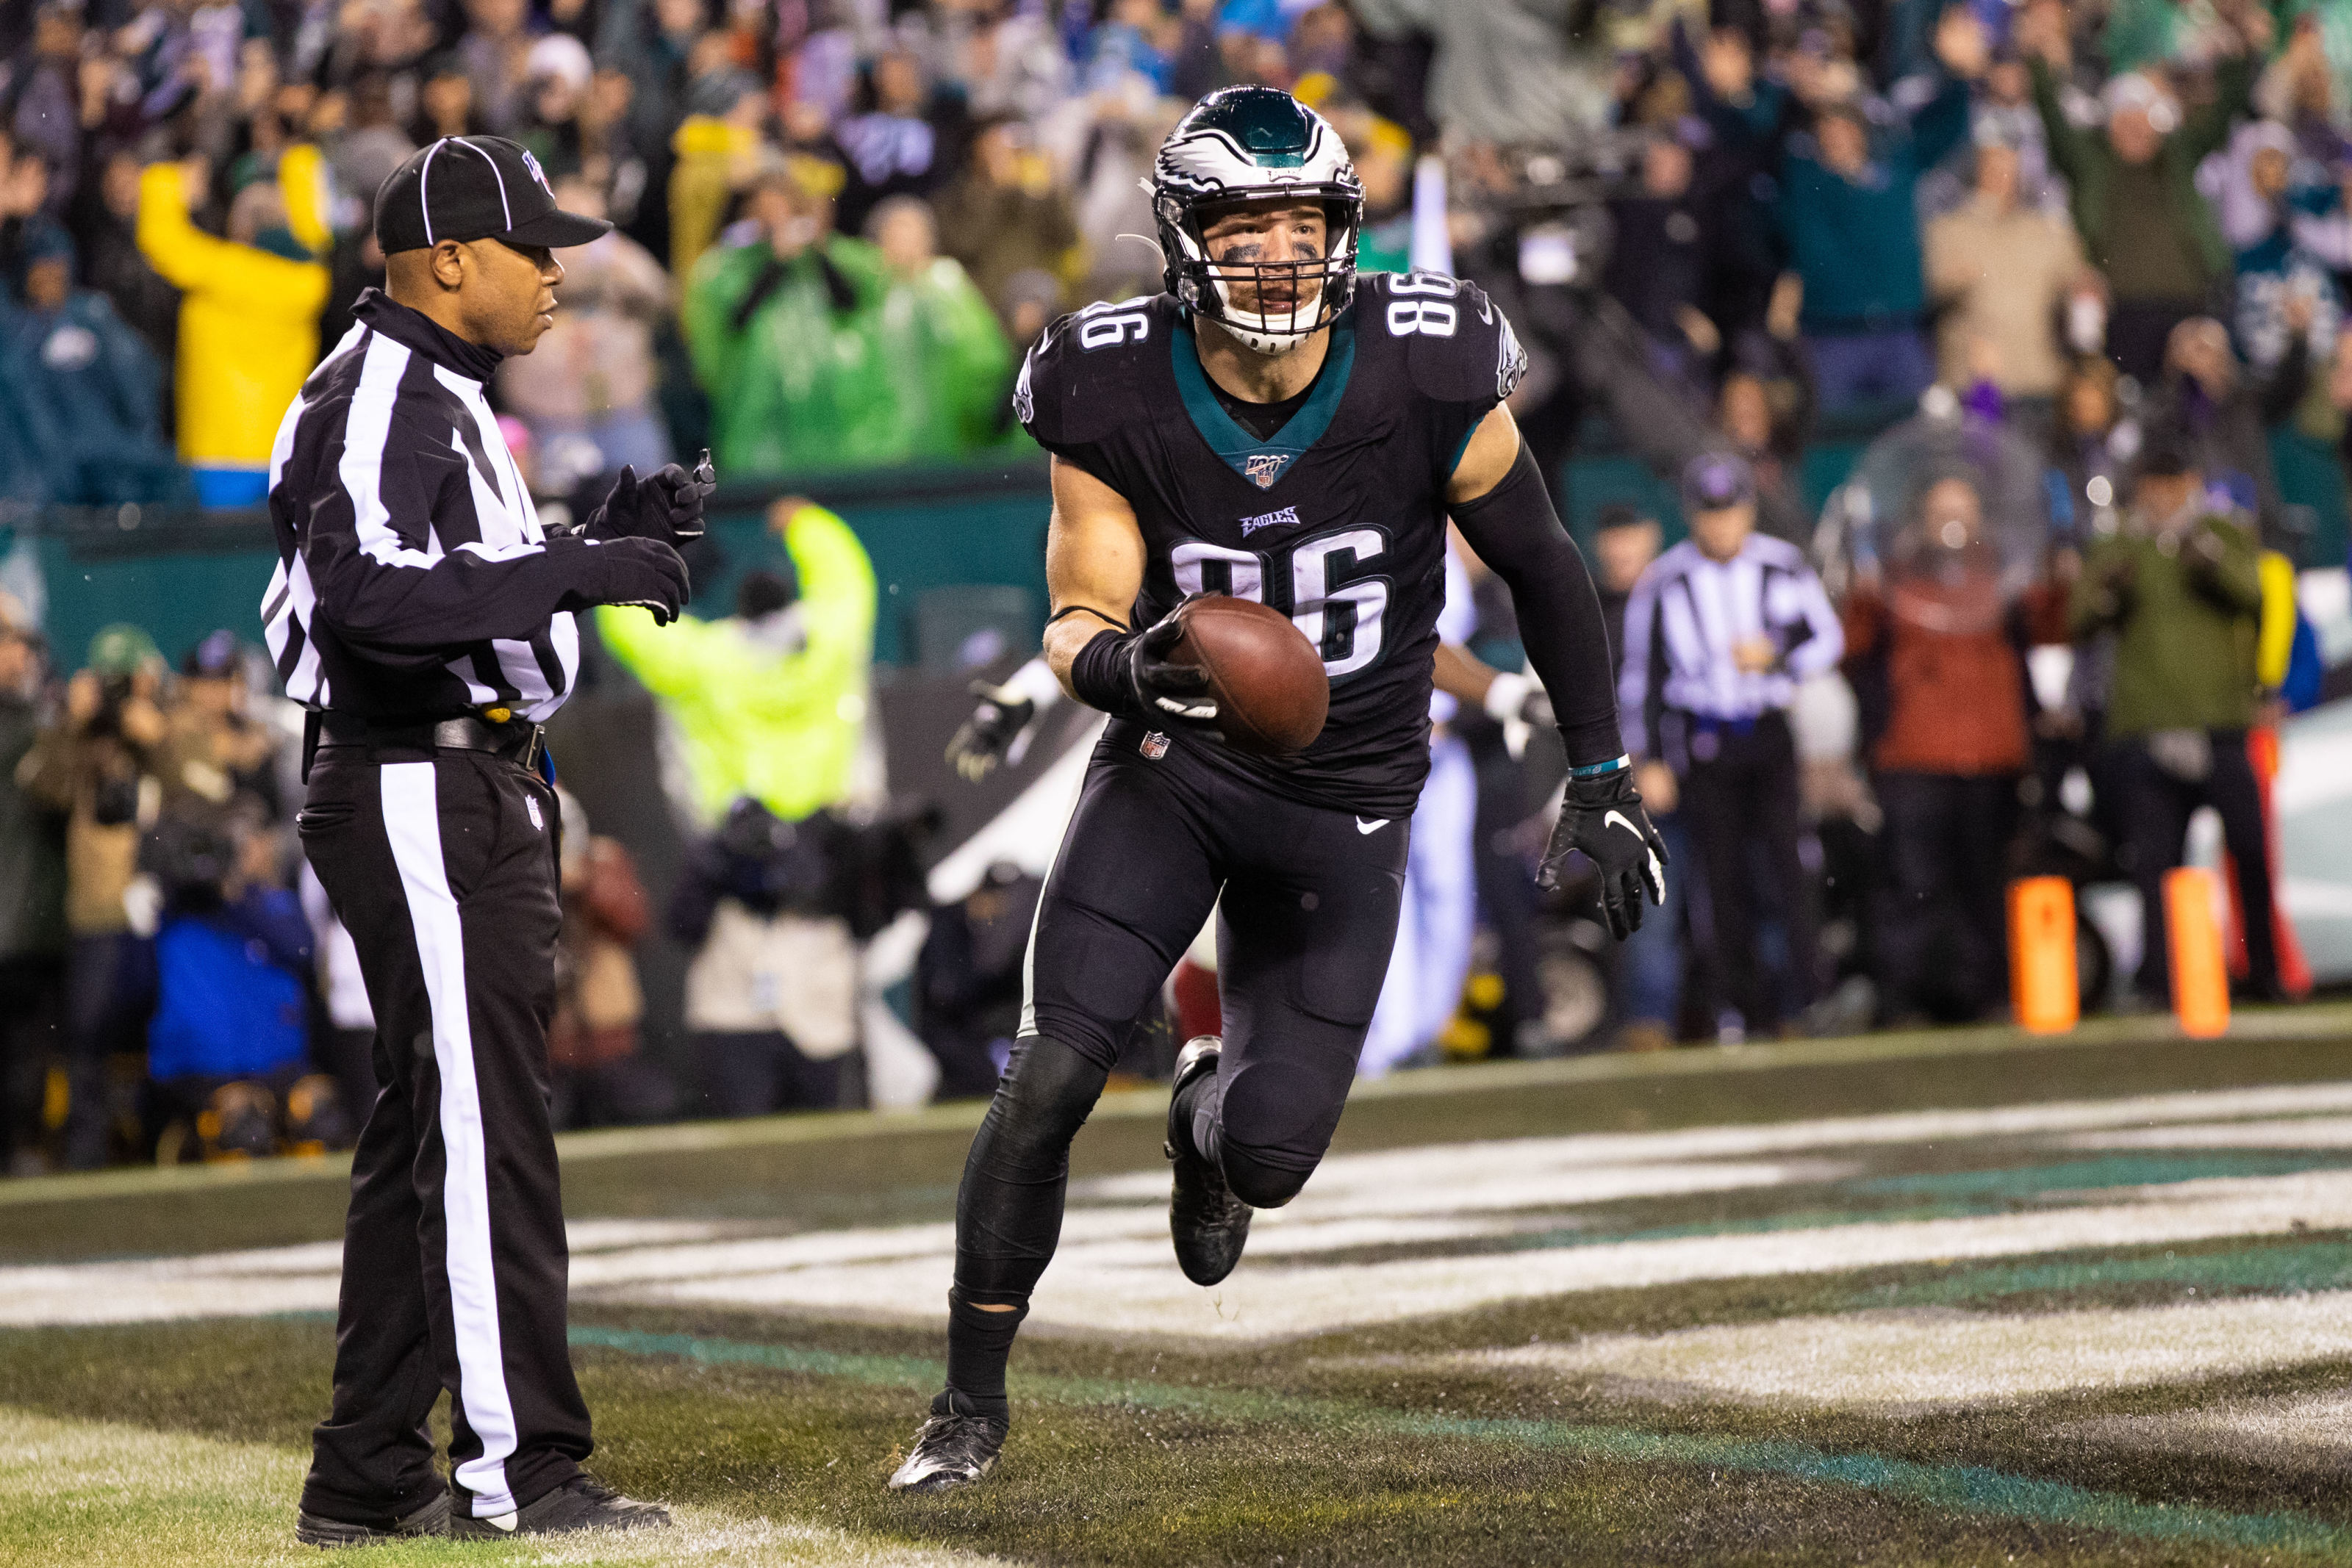 Cardinals acquire tight end Zach Ertz in trade with Eagles